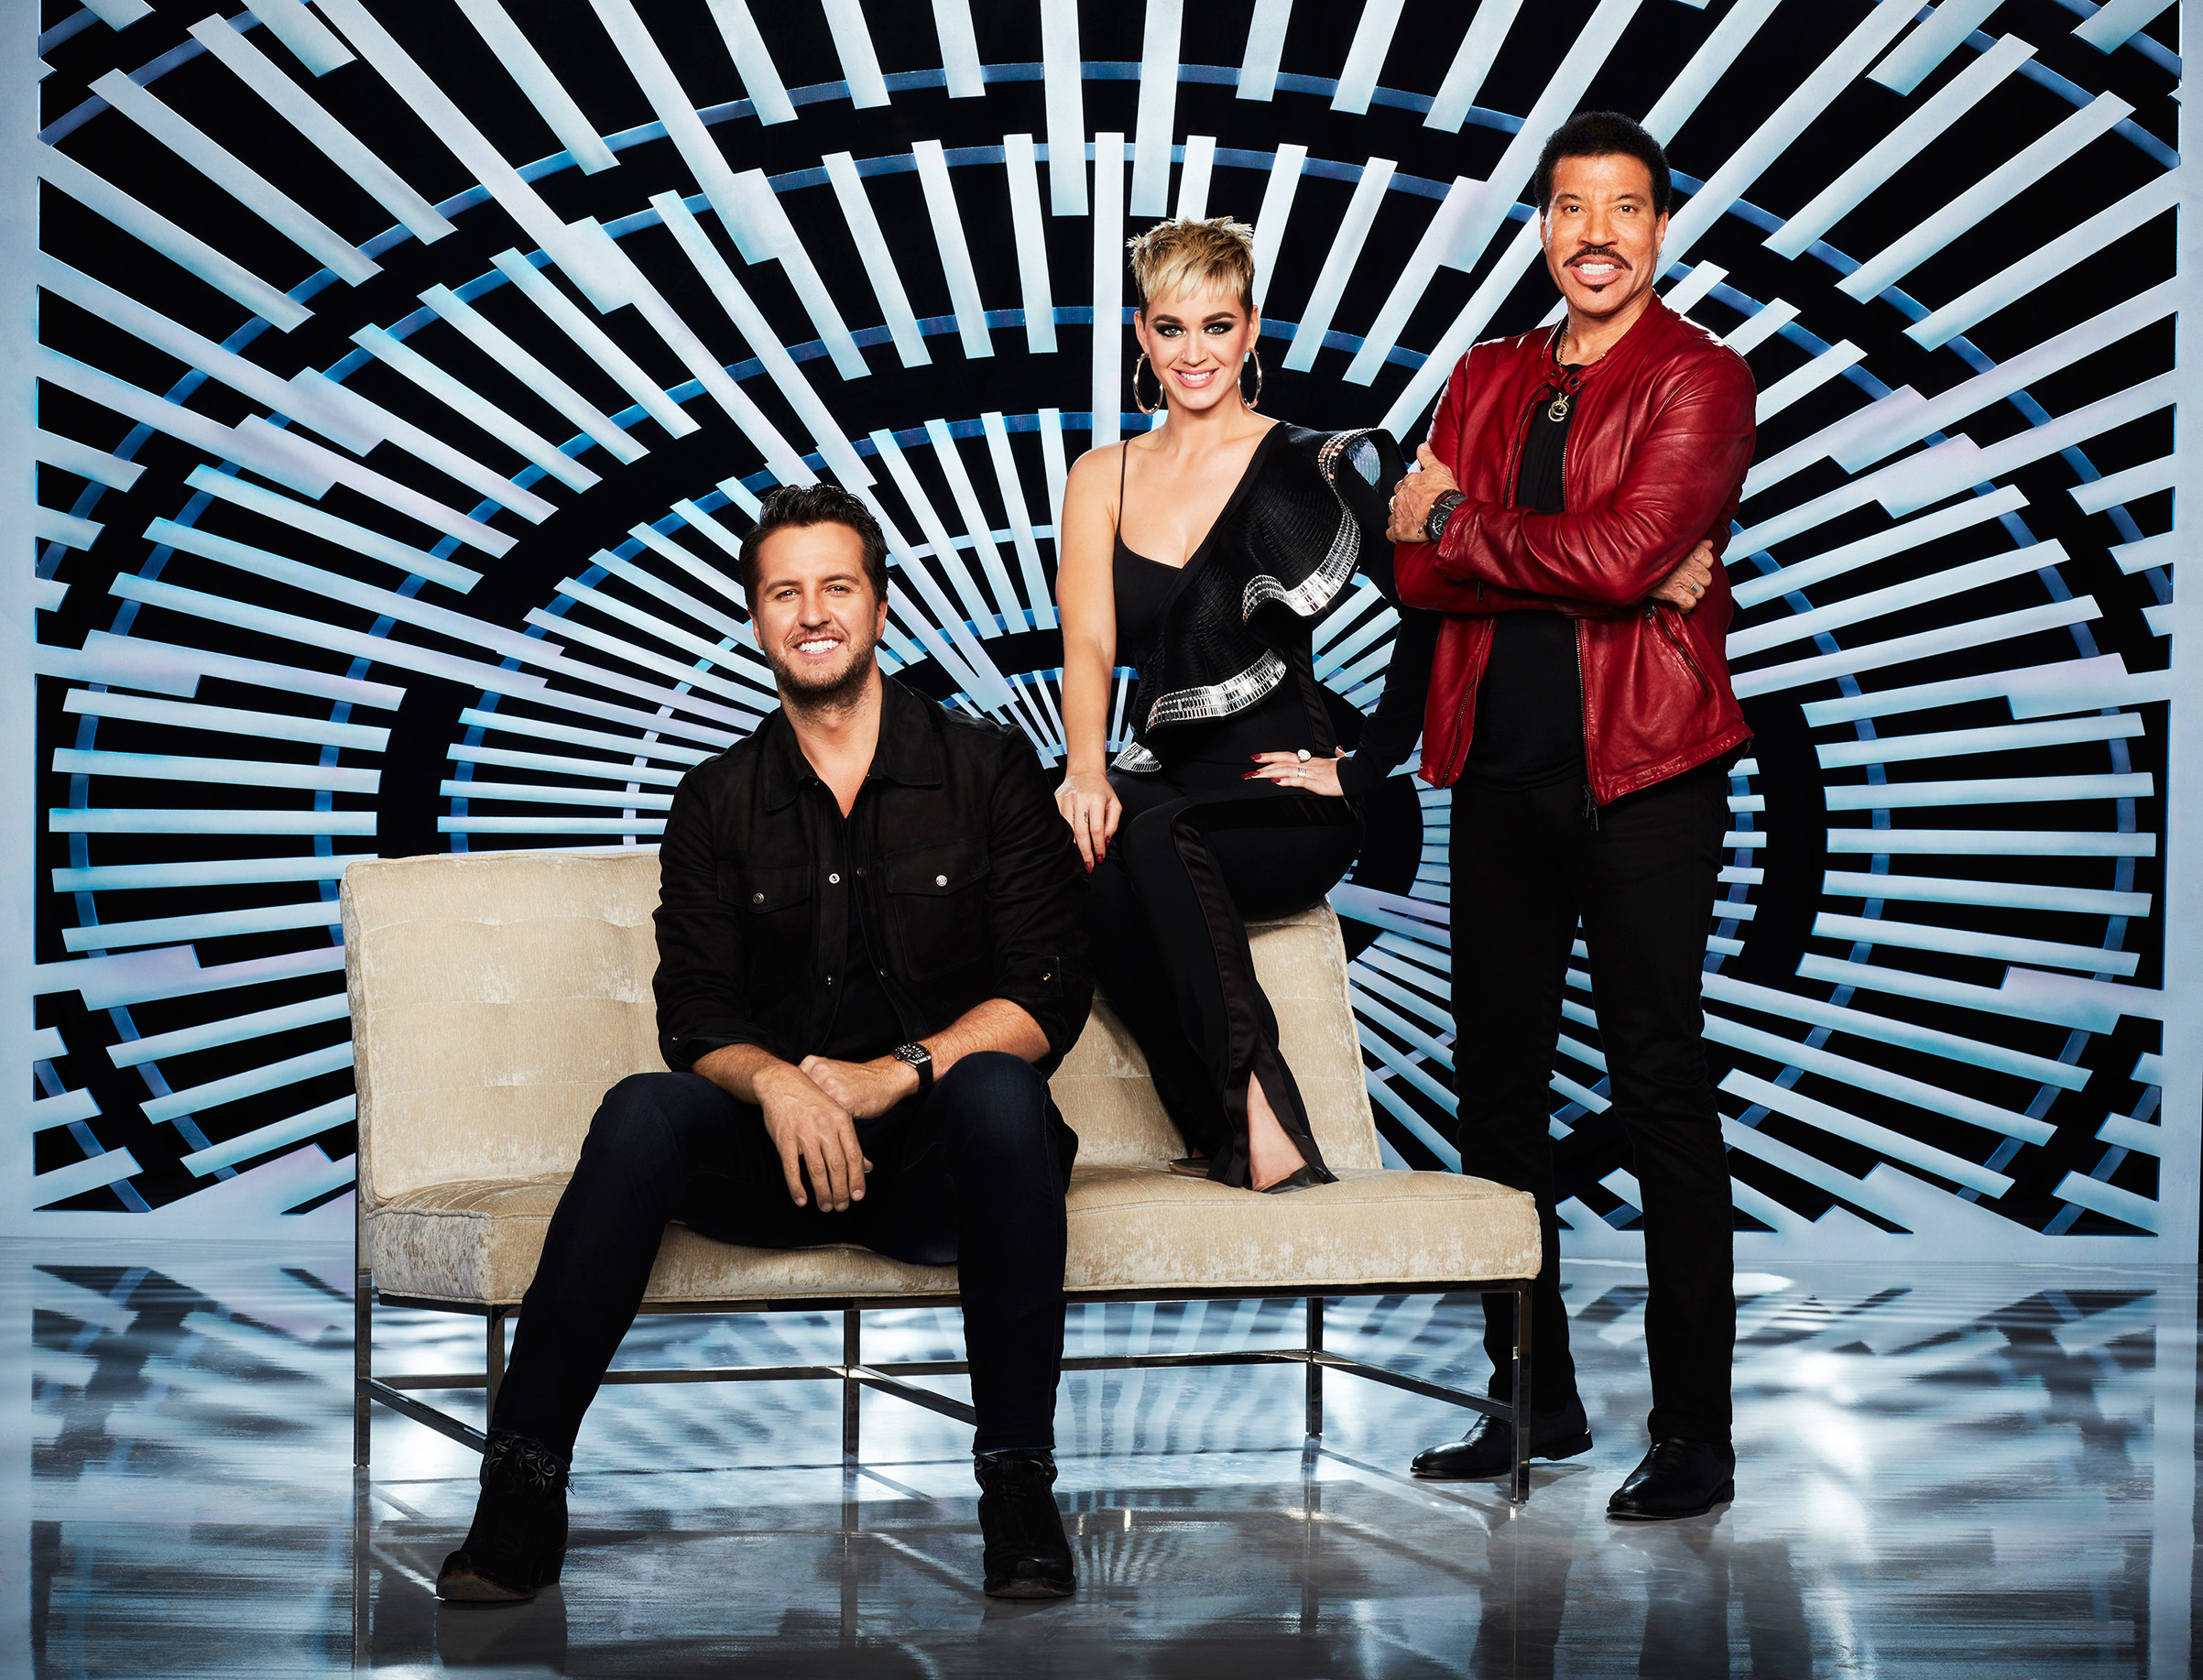 Luke Bryan, Katy Perry and Lionel Richie will counsel aspiring singers when American Idol returns on March 11 on ABC. (Craig Sjodin—ABC)